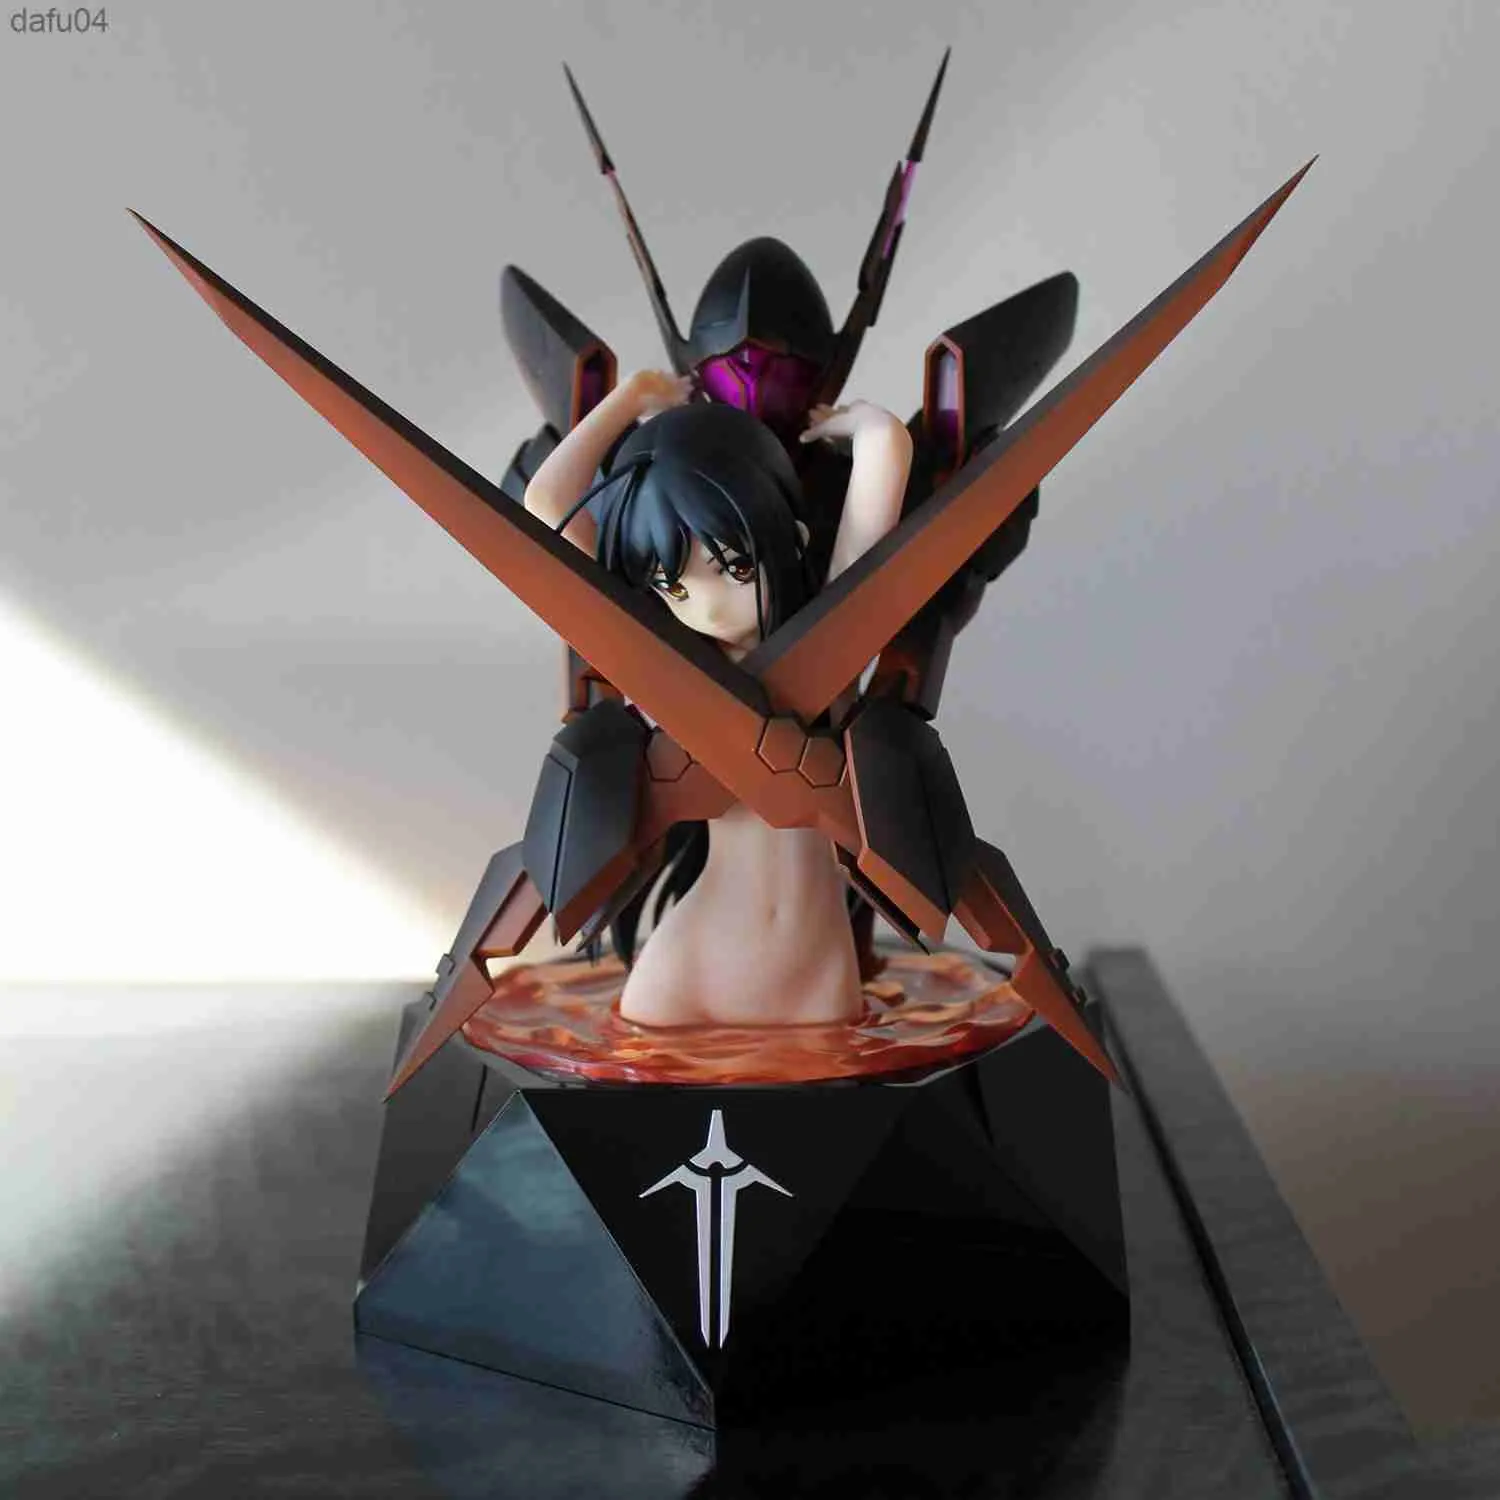 20cm Accel World Kuroyukihime Death by Embracing Hentai Figure PVC Sexy Girl Model Toy Adulto Anime Action Dolls Collection Model L230522